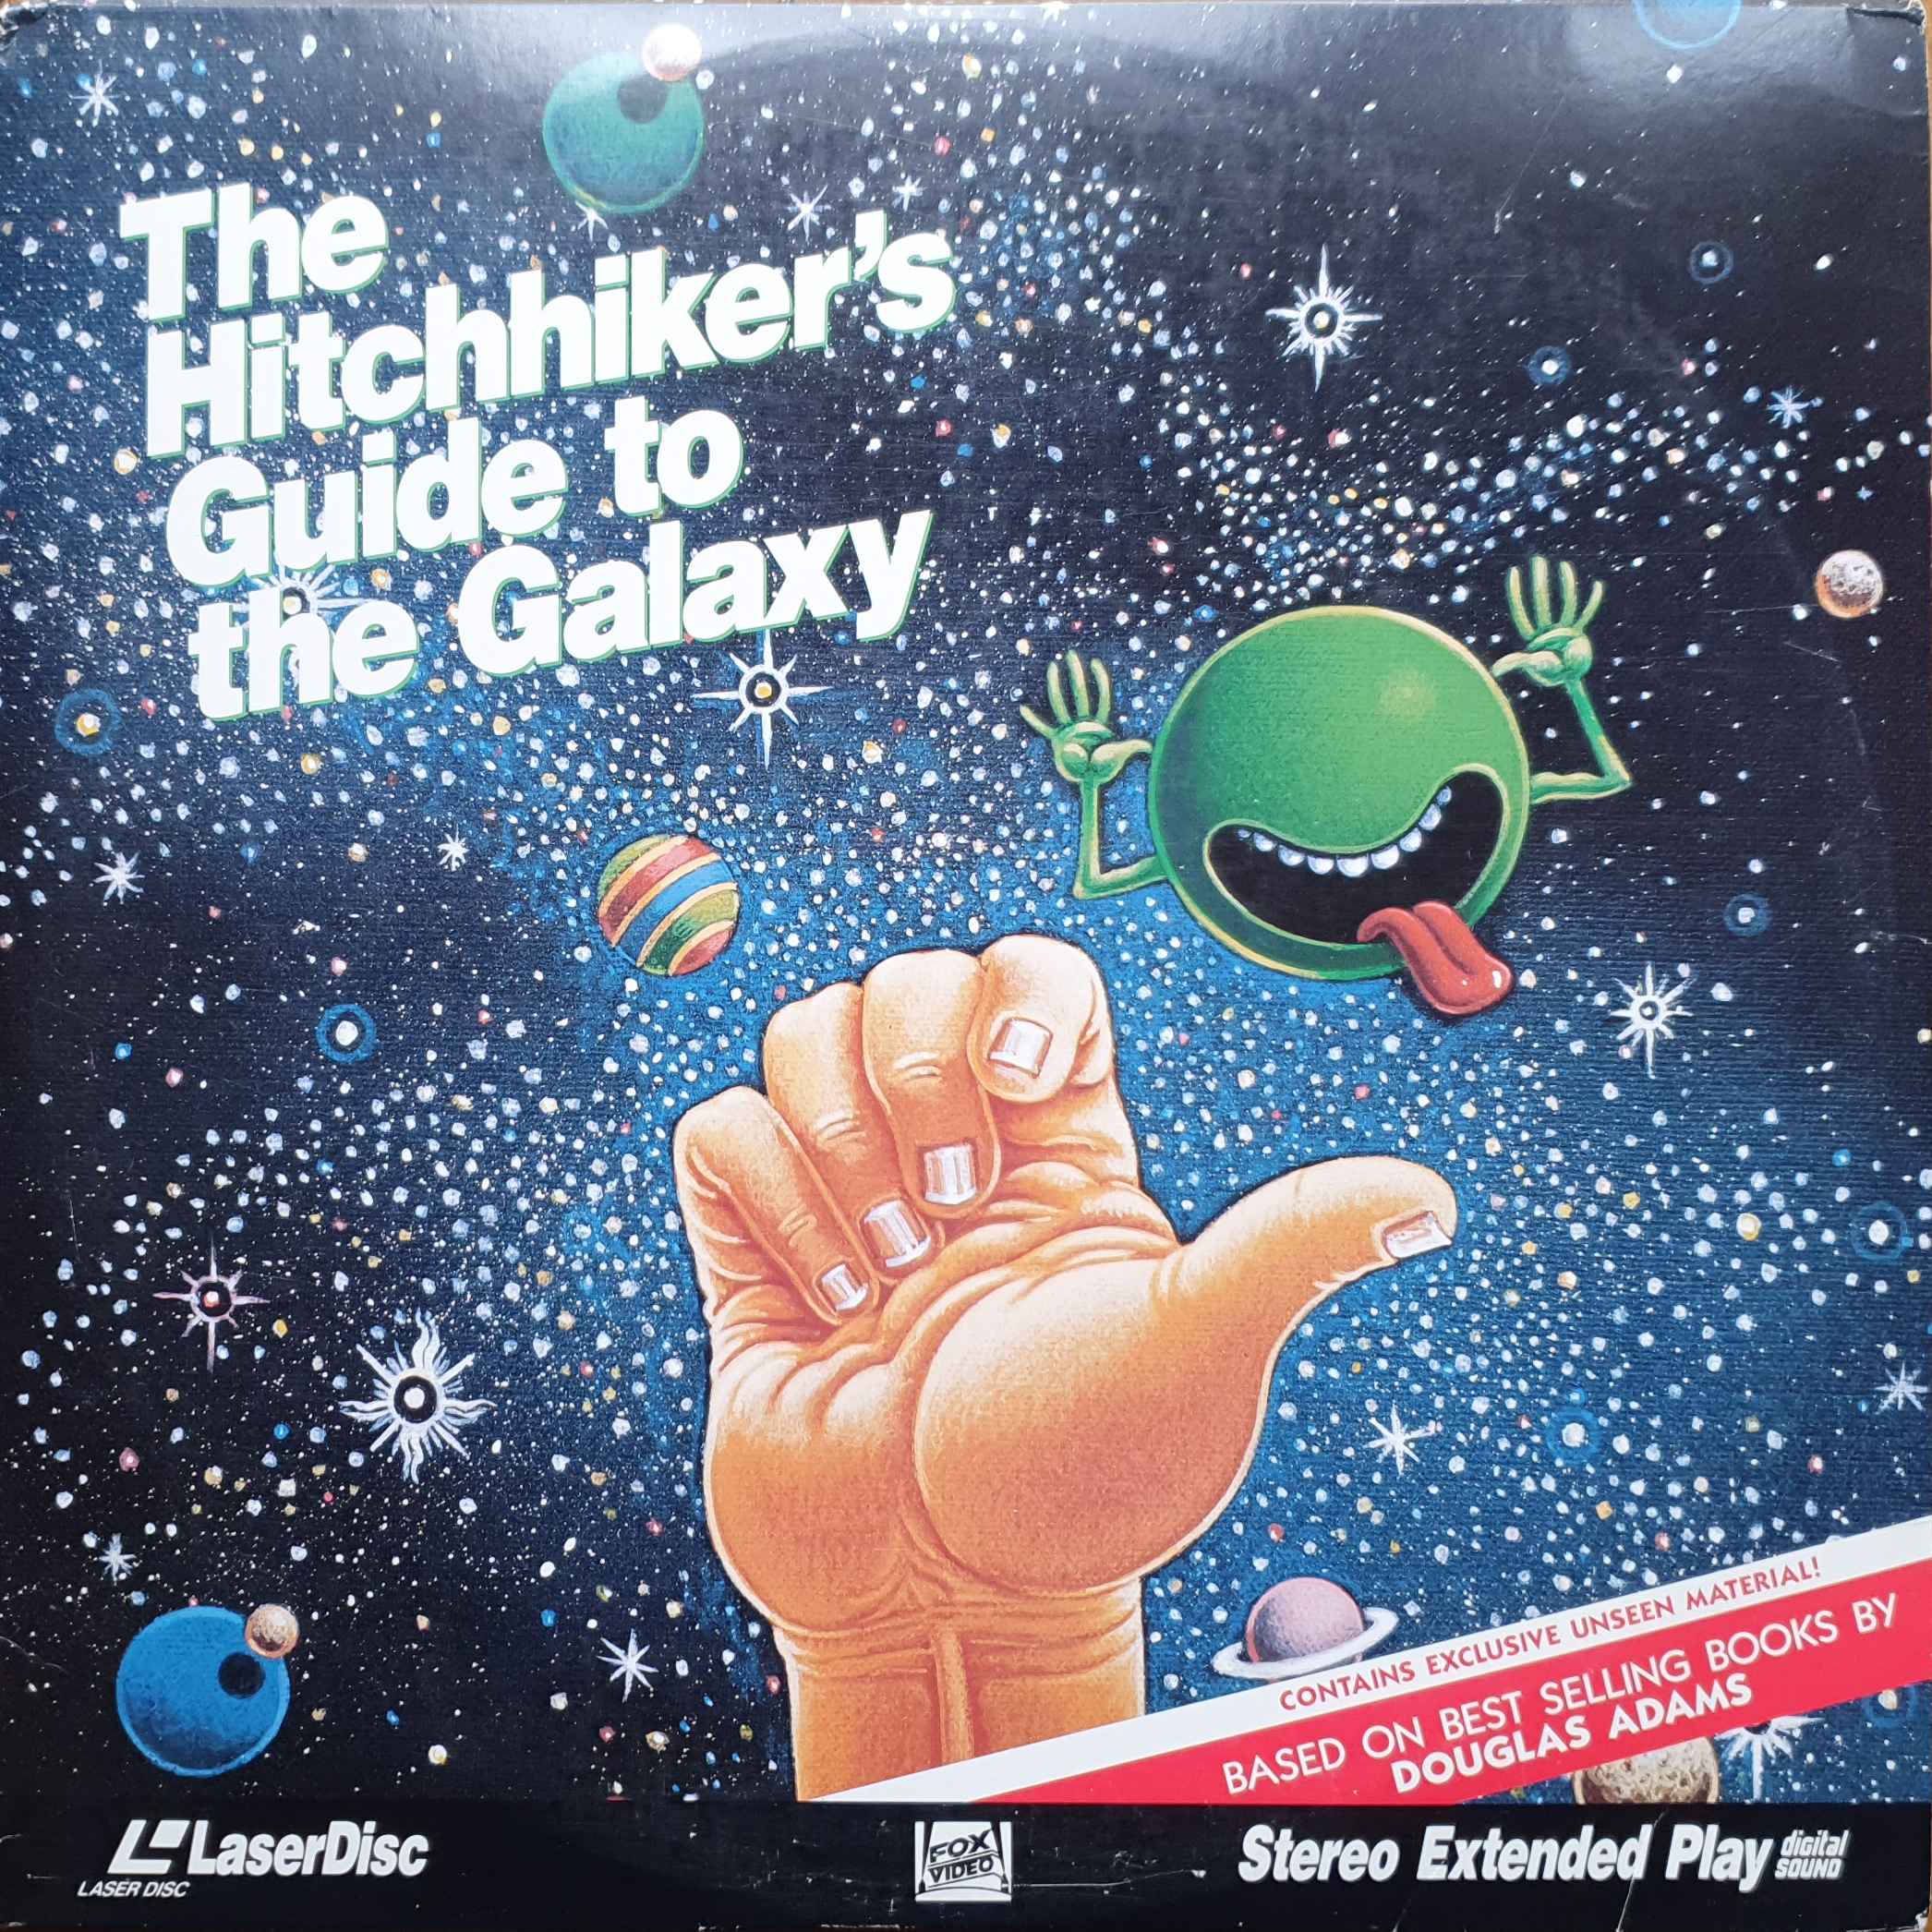 Picture of The hitch-hiker's guide to the galaxy by artist Douglas Adams from the BBC anything_else - Records and Tapes library